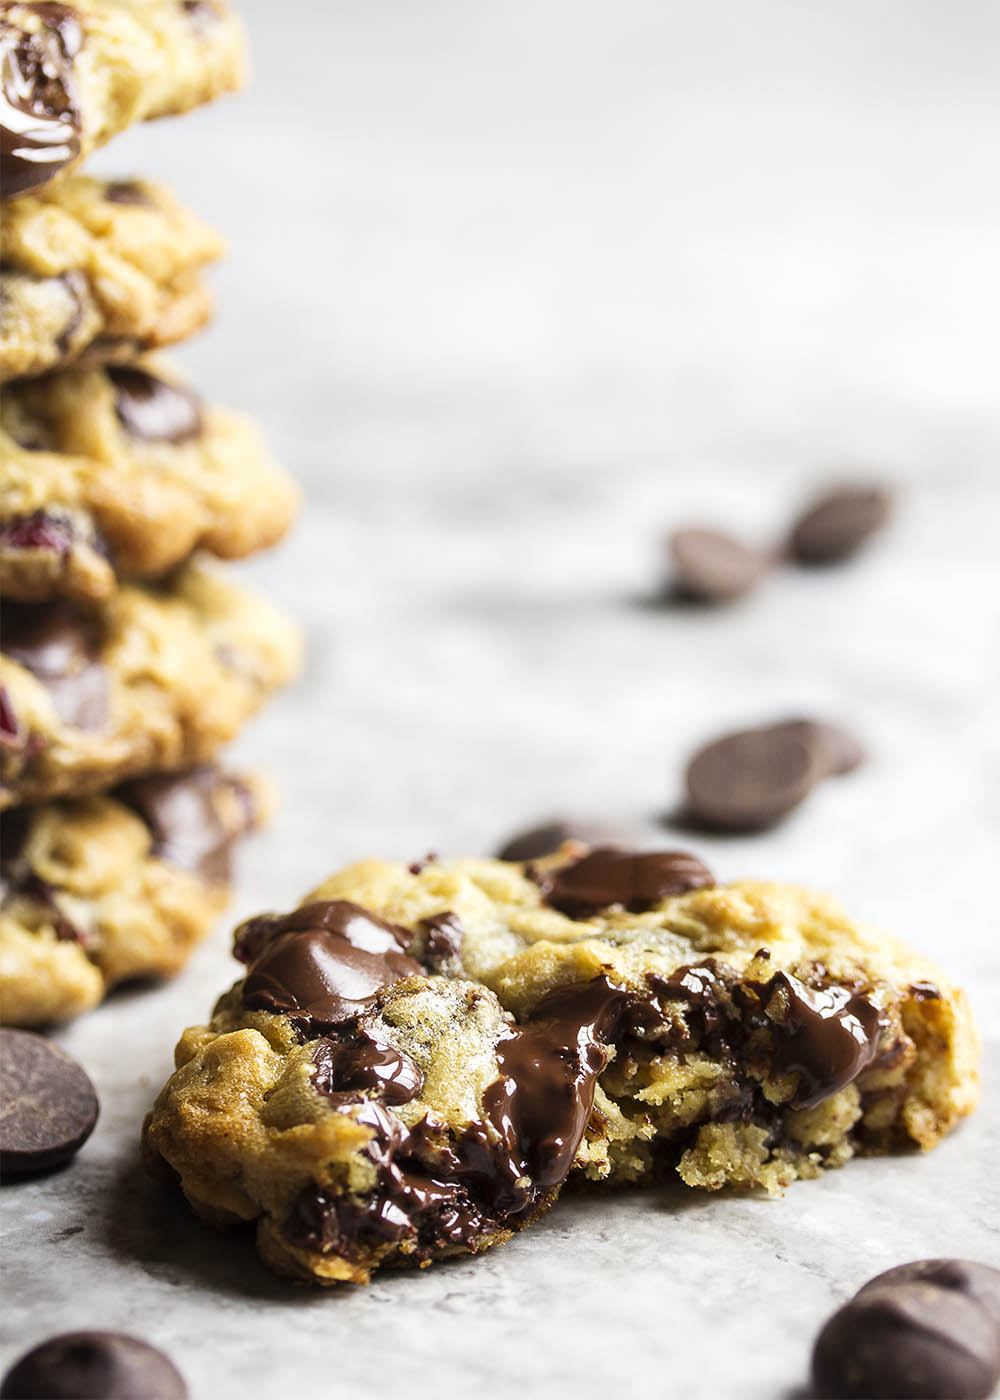 One Bowl Chocolate Cherry Oatmeal Cookies - This recipe for one bowl gooey, chocolatey, cherry studded oatmeal cookies is so easy to make that you'll want to bake them right now. And you should because they are as tasty as they are easy. | justalittlebitofbacon.com